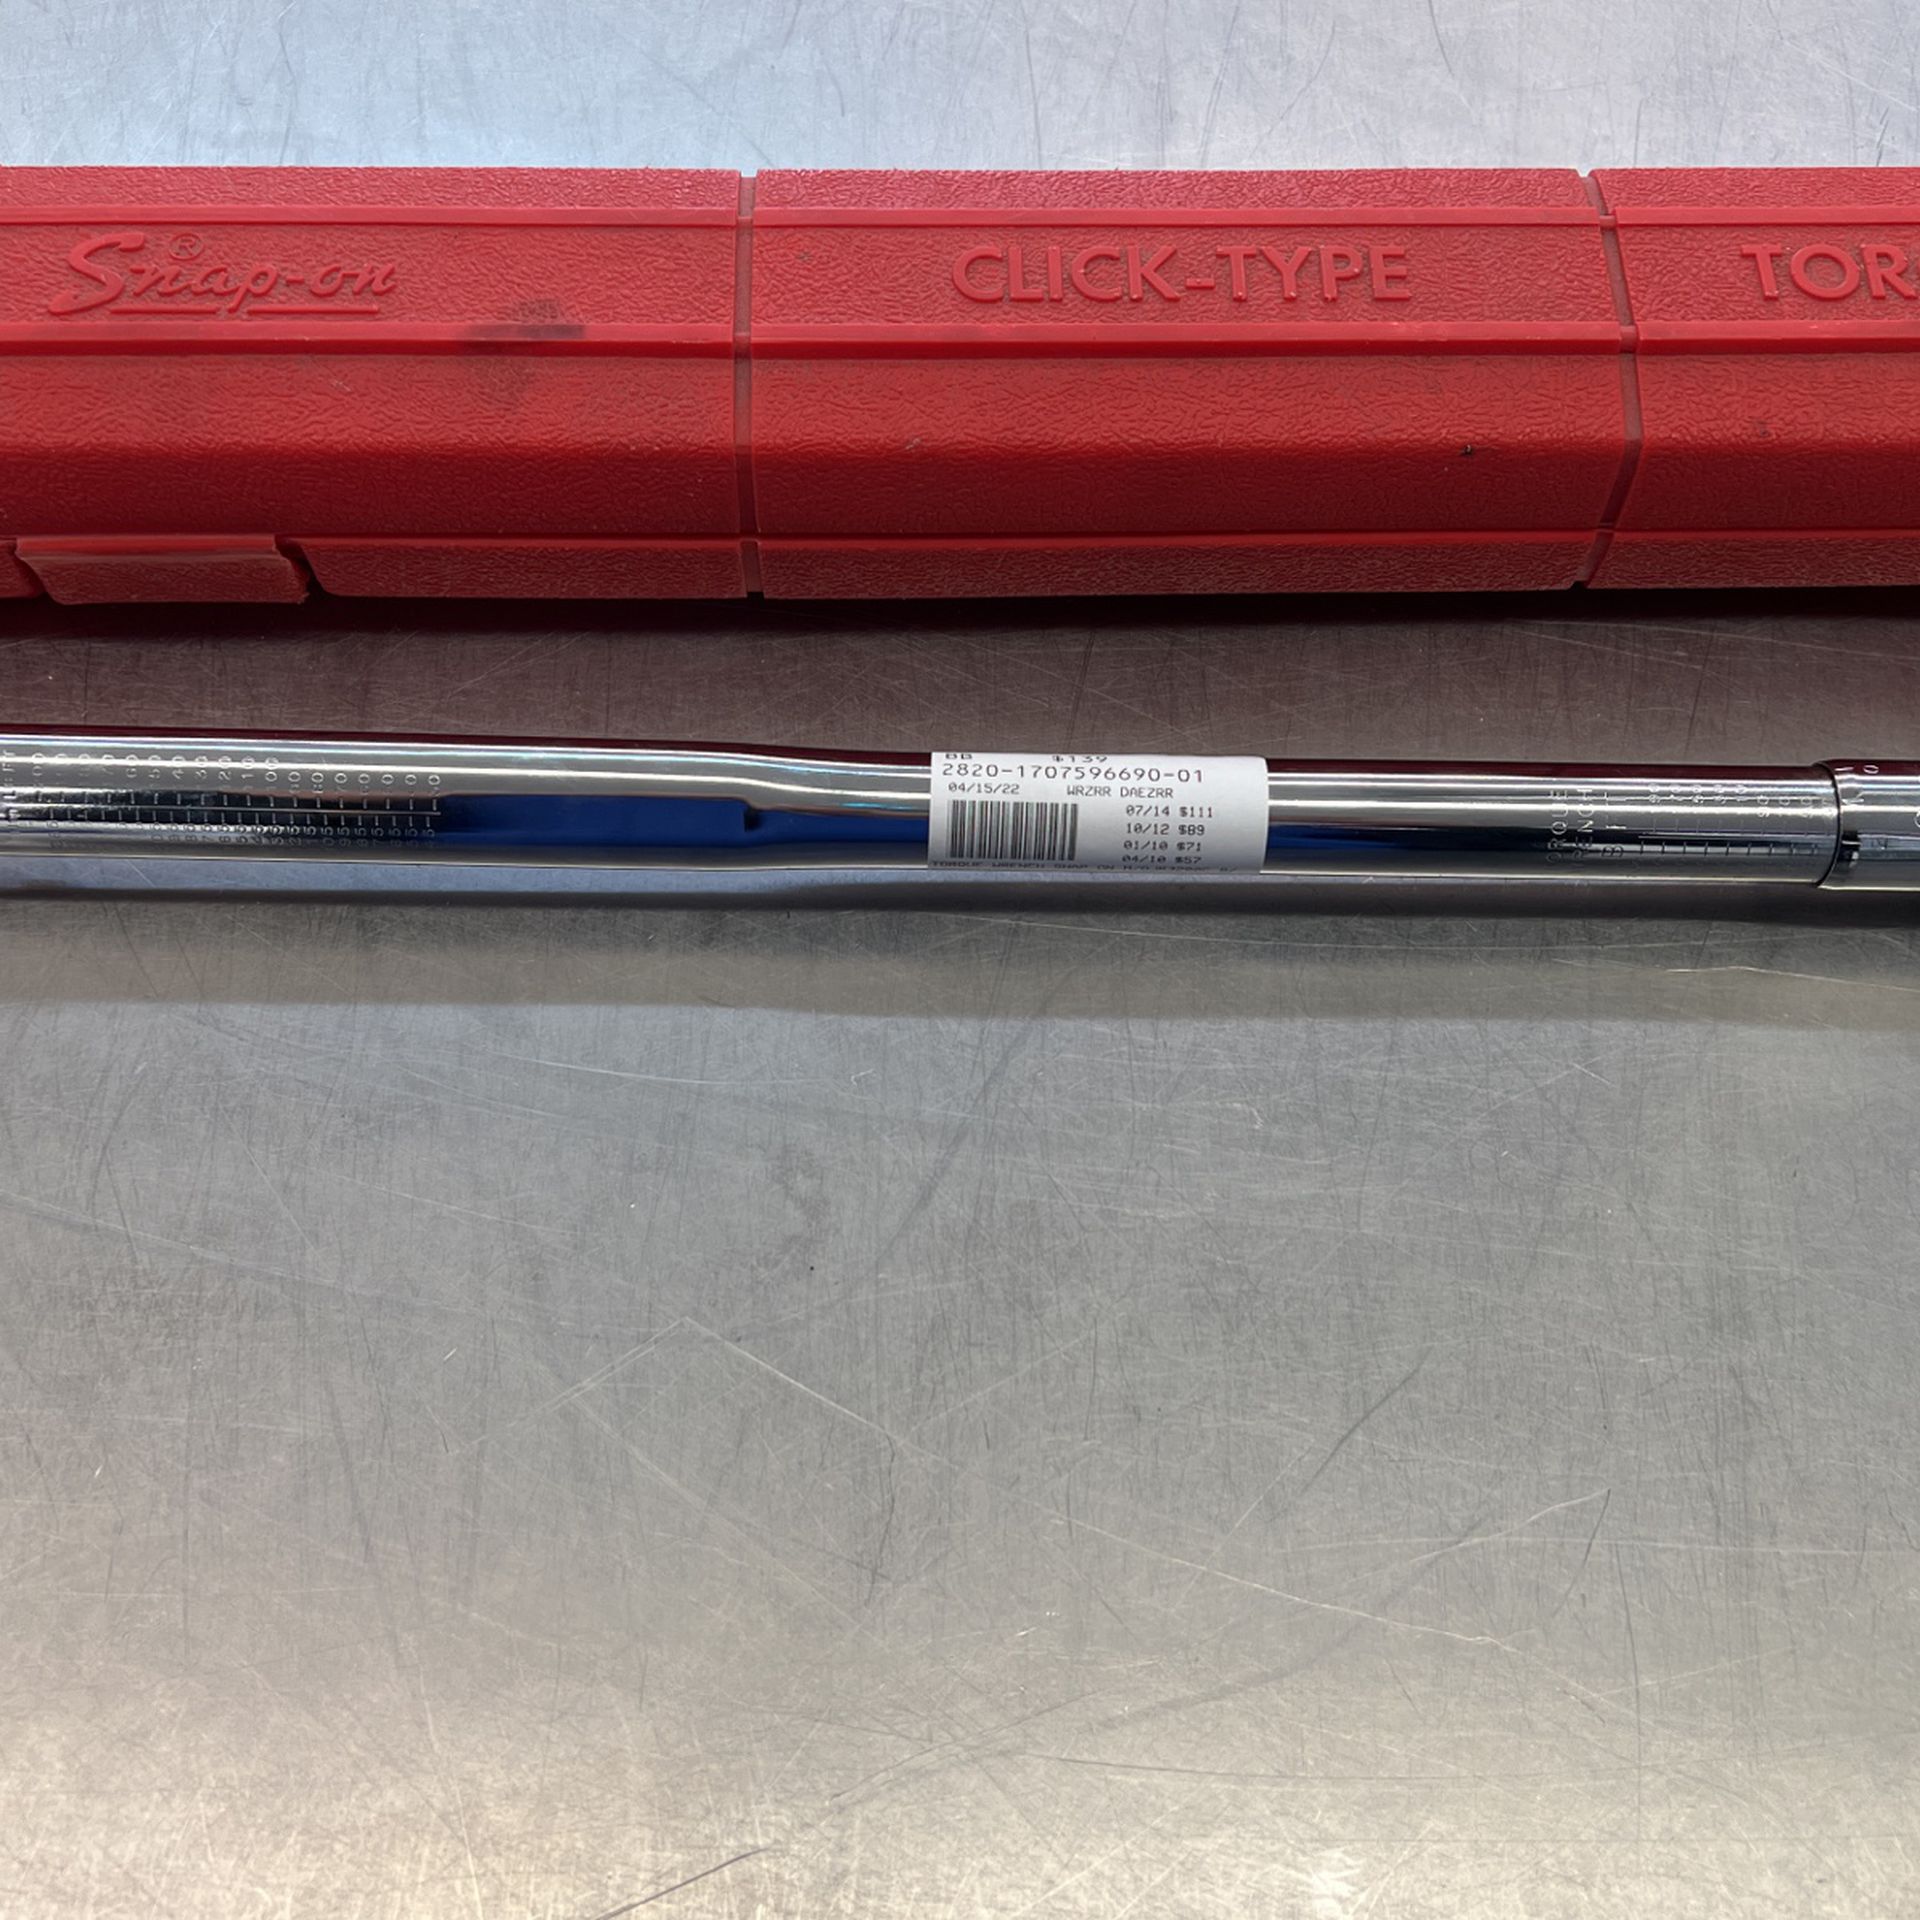 Snap-On Torque Wrench Model QJR3200C